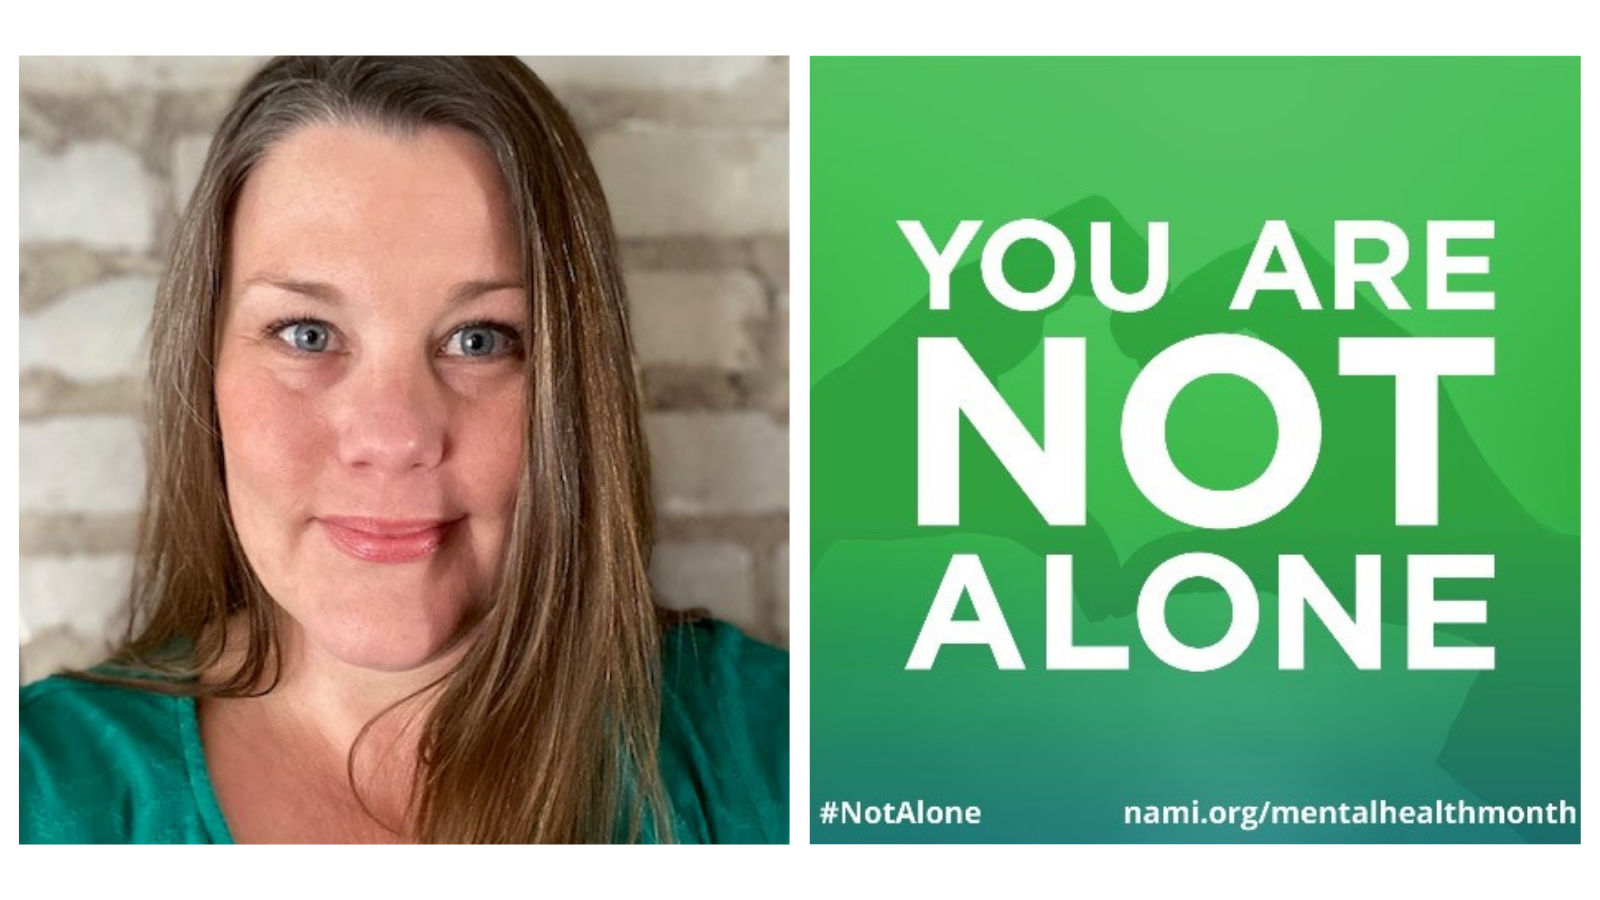 Chief Clinical Officer Beth and the words "You are not alone."